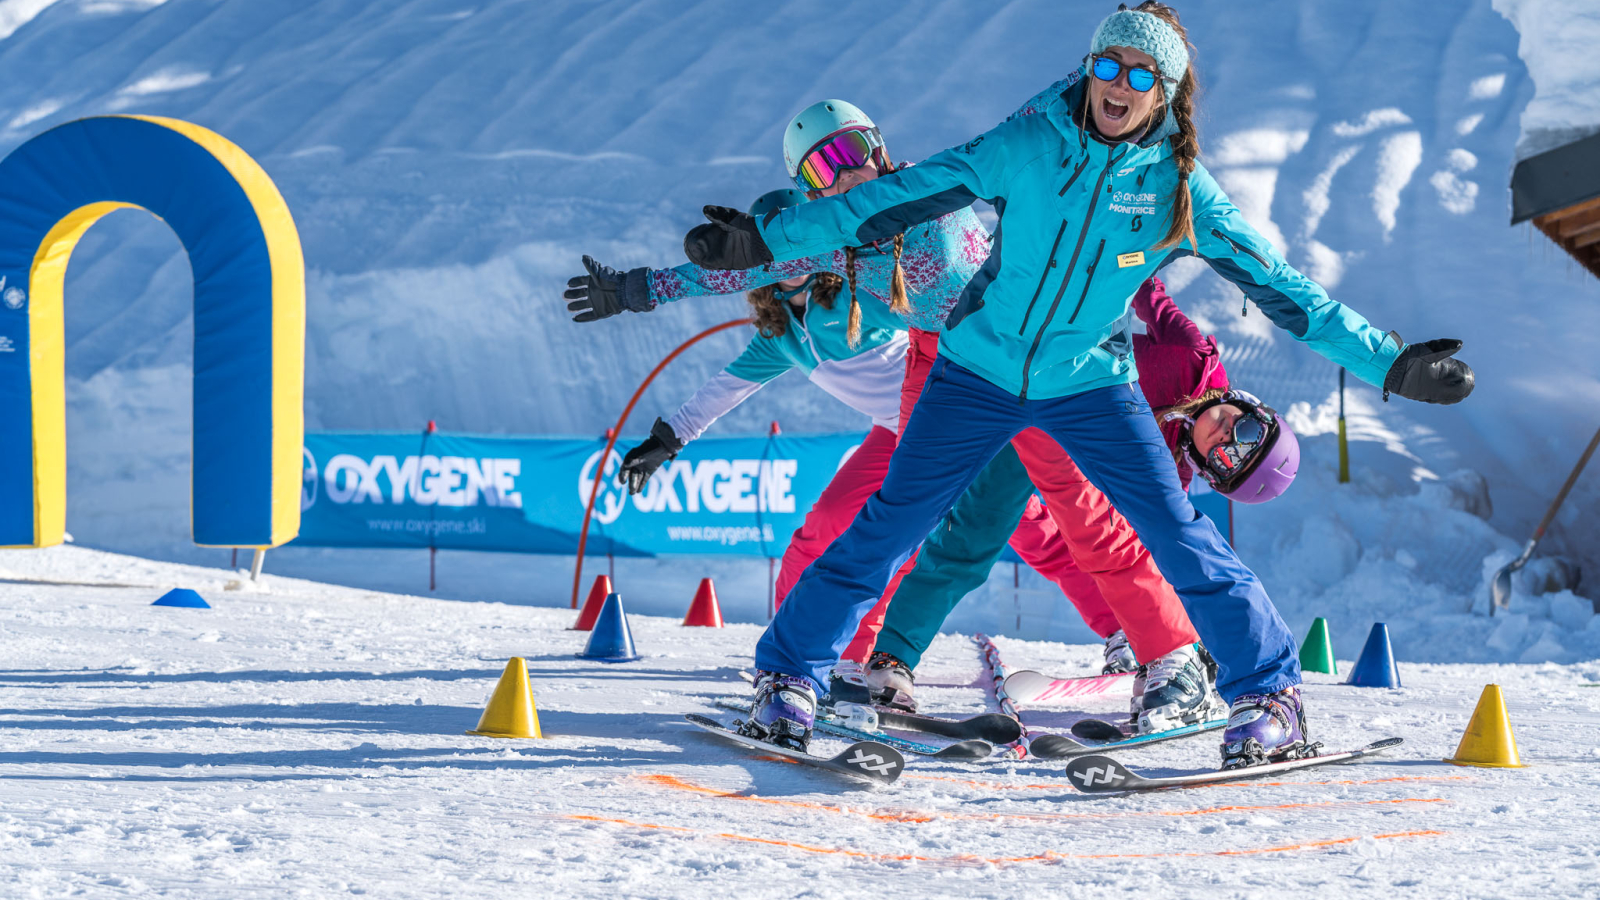 Ski lessons are centred around fun games and activities so they learn to ski whilst enjoying themselves.